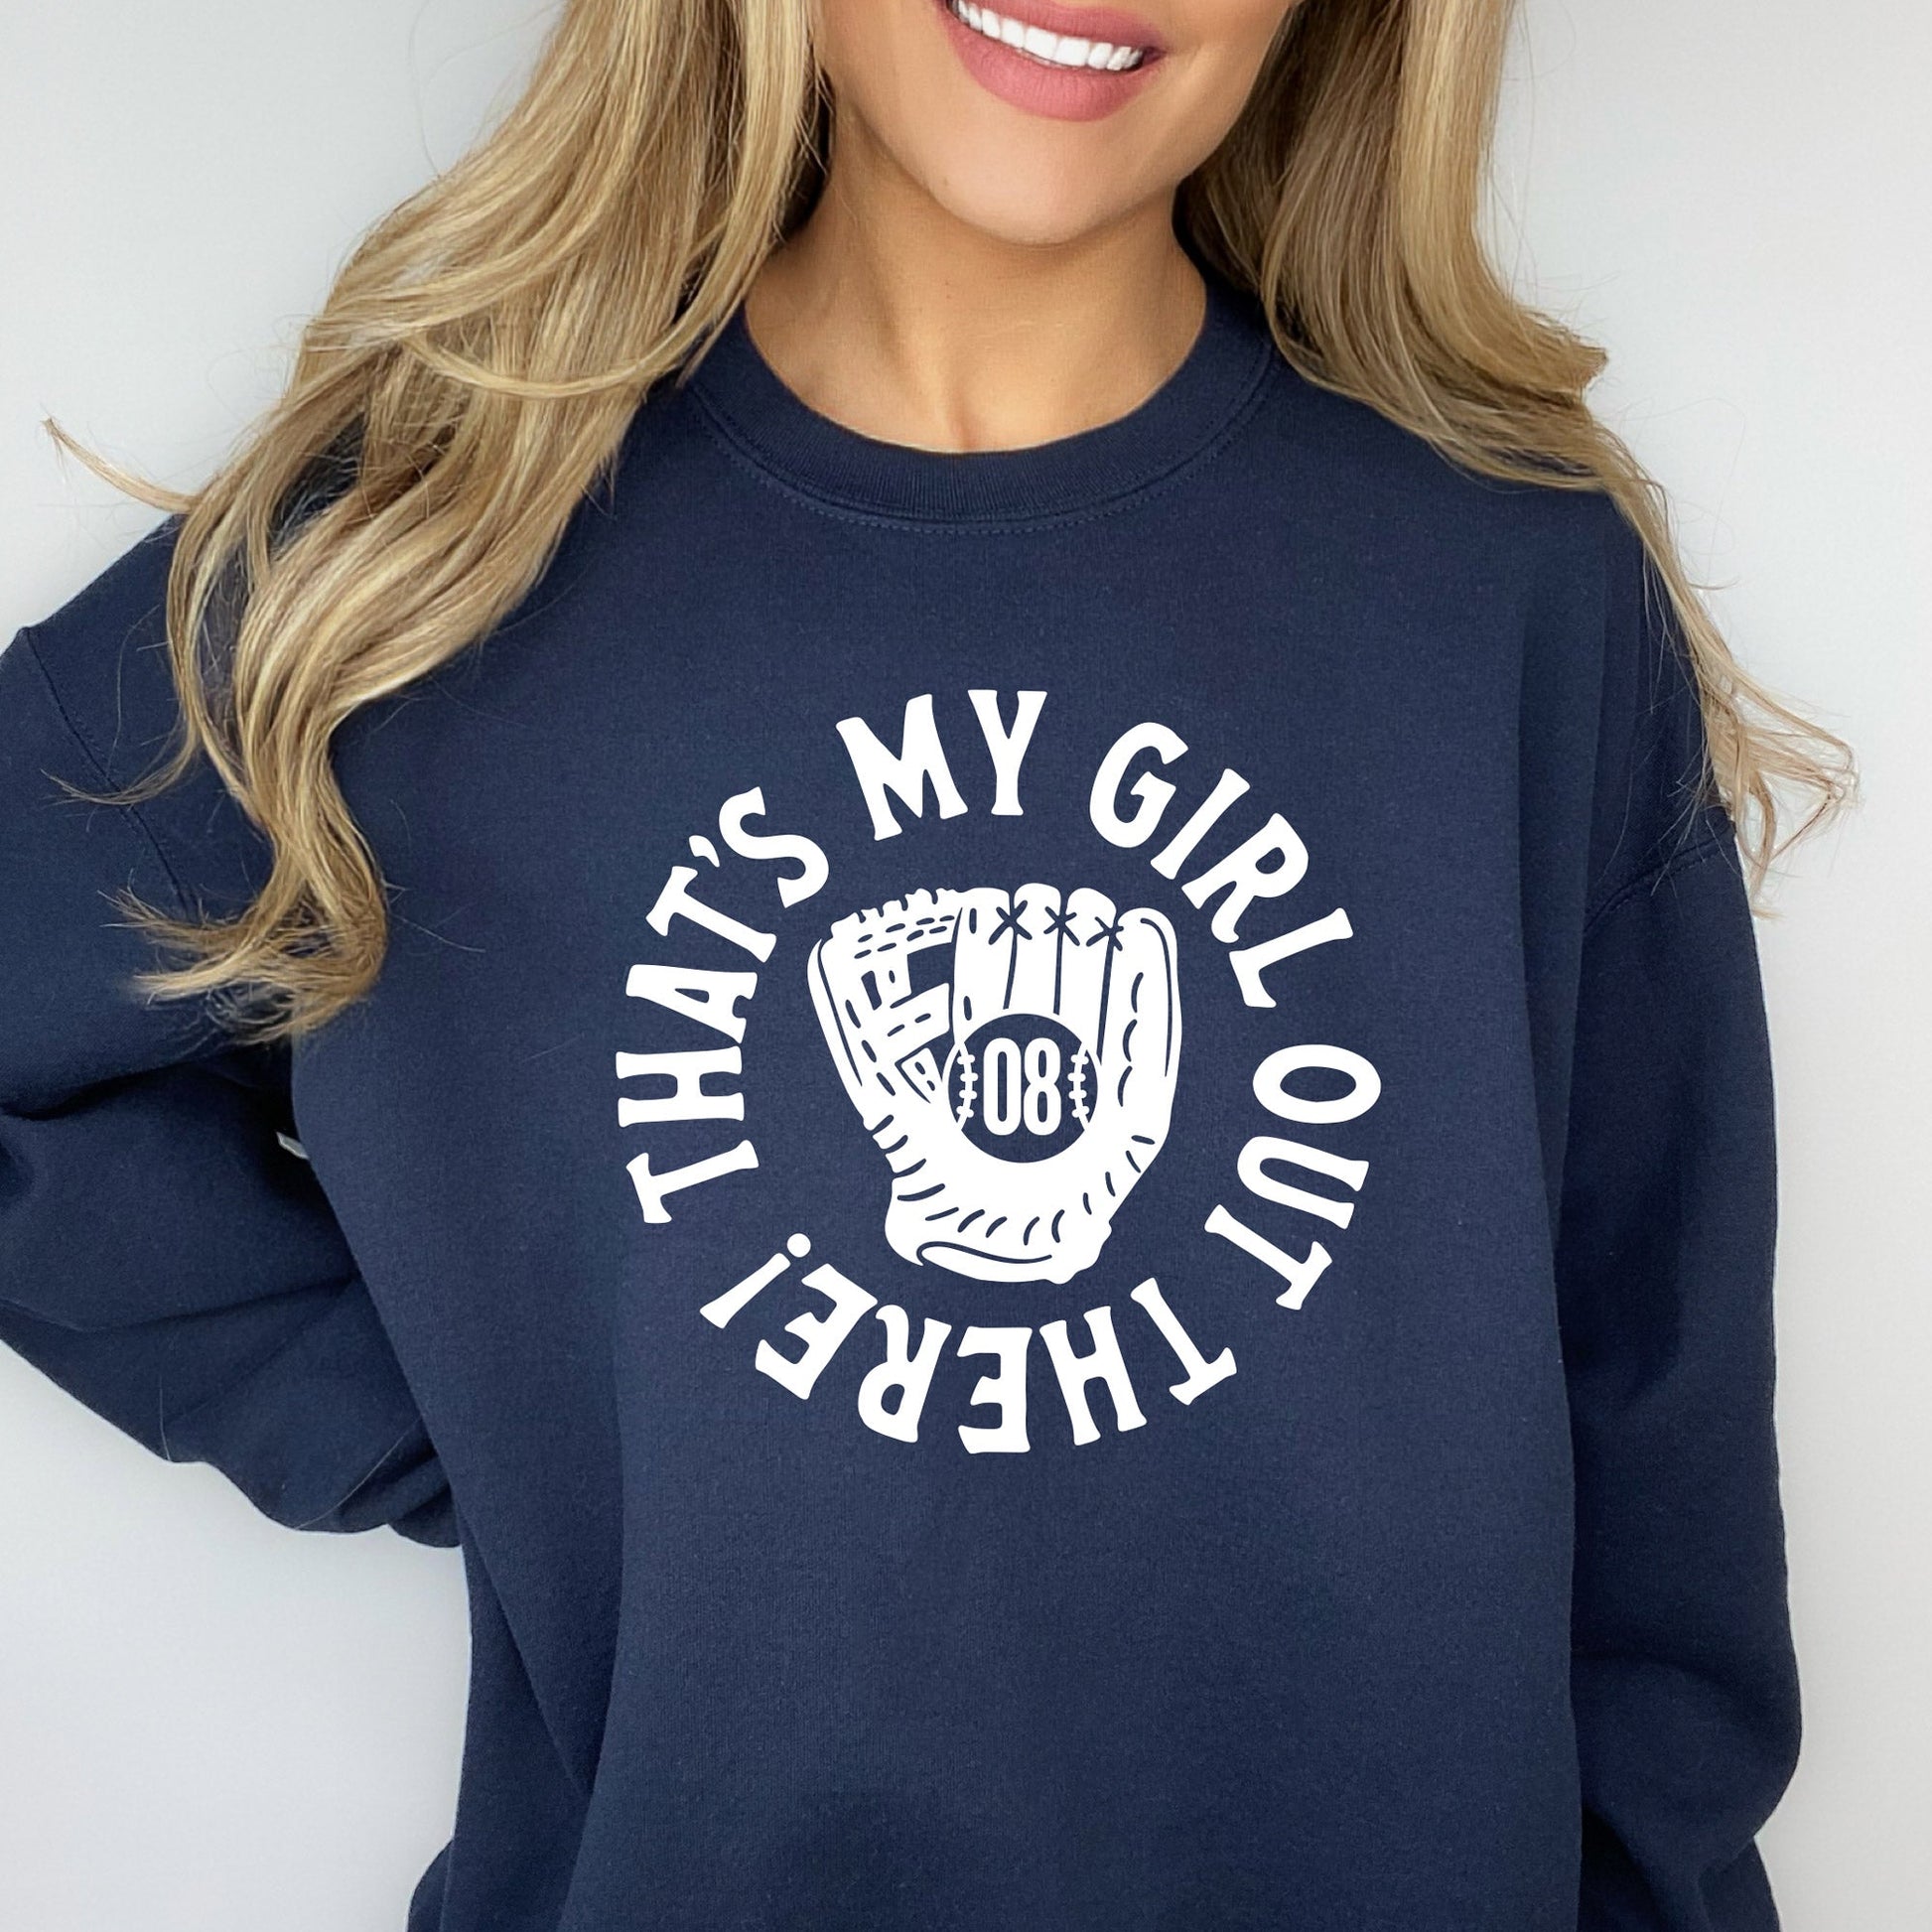 woman wearing a navy blue crewneck sweatshirt with a printed design of a baseball mitt with player number in the center and 'that's my girl out there!' in a circle around it.